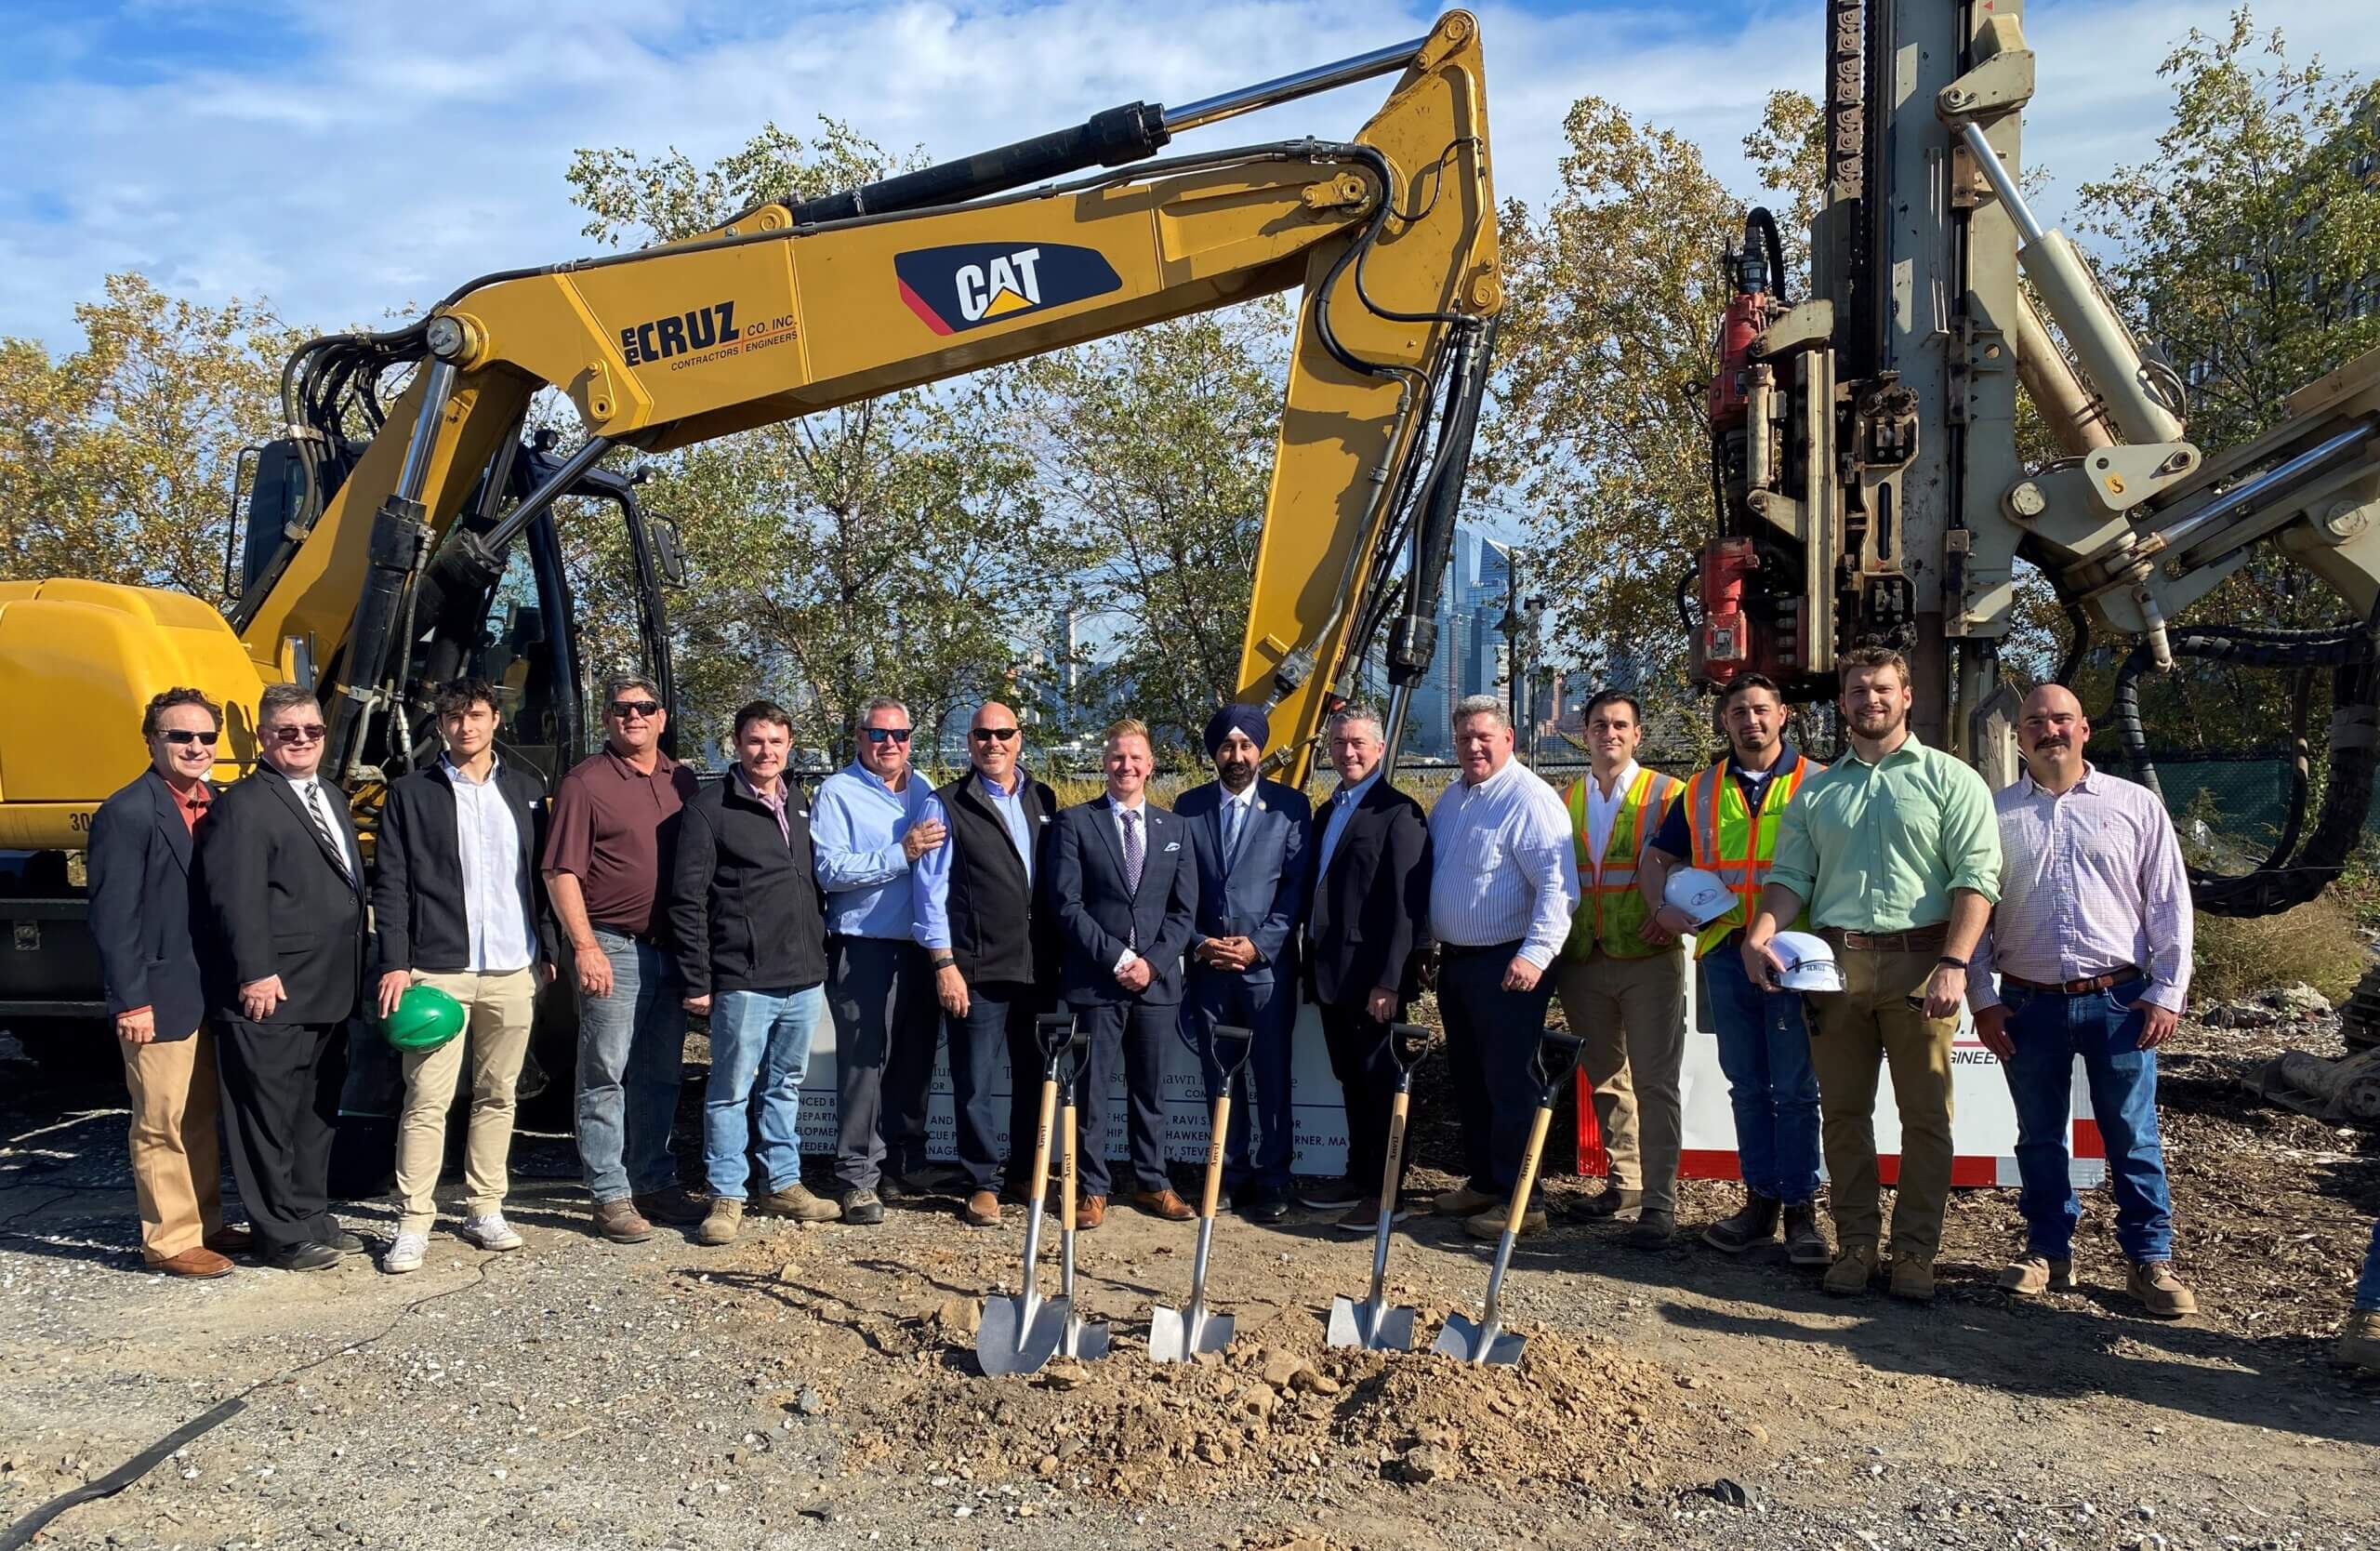 Groundbreaking at $251 million Hudson River Resiliency Project with E.E. Cruz